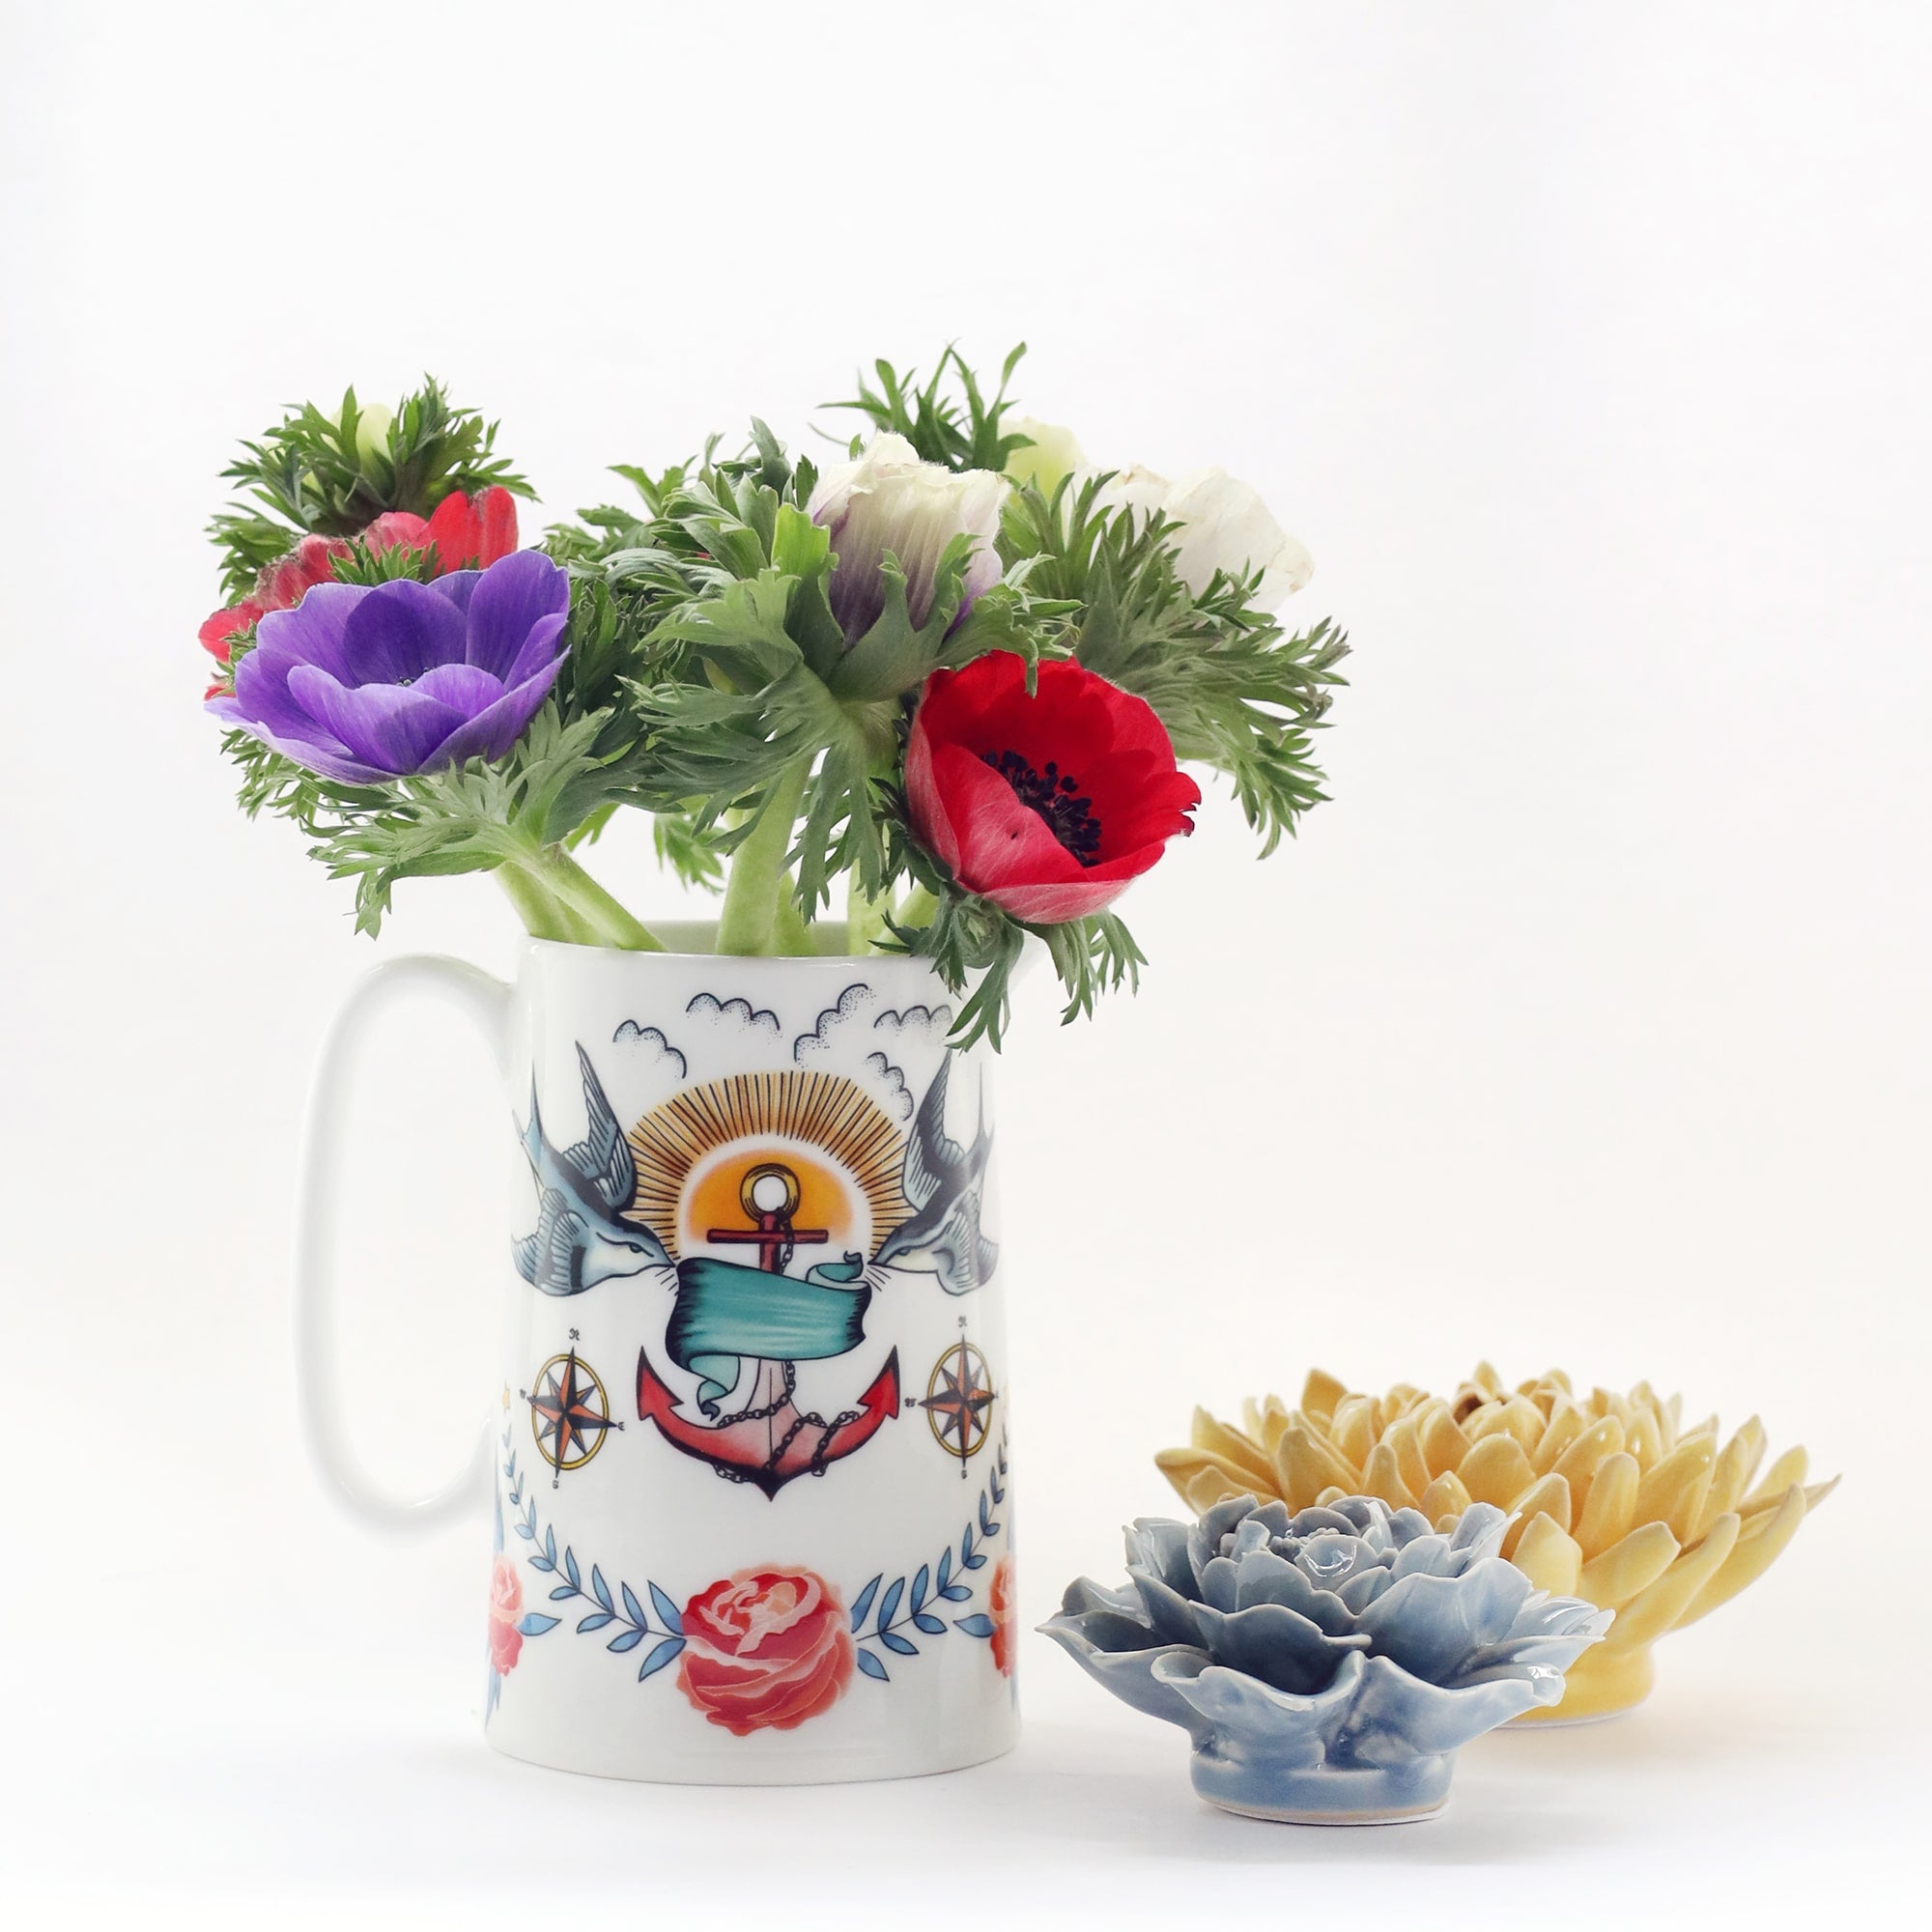 White bone china jug with brightly coloured tattoo inspired design of swallows, anchor and roses with red, white and purple anemones in it. The are 2 ceramic flowers next to it.